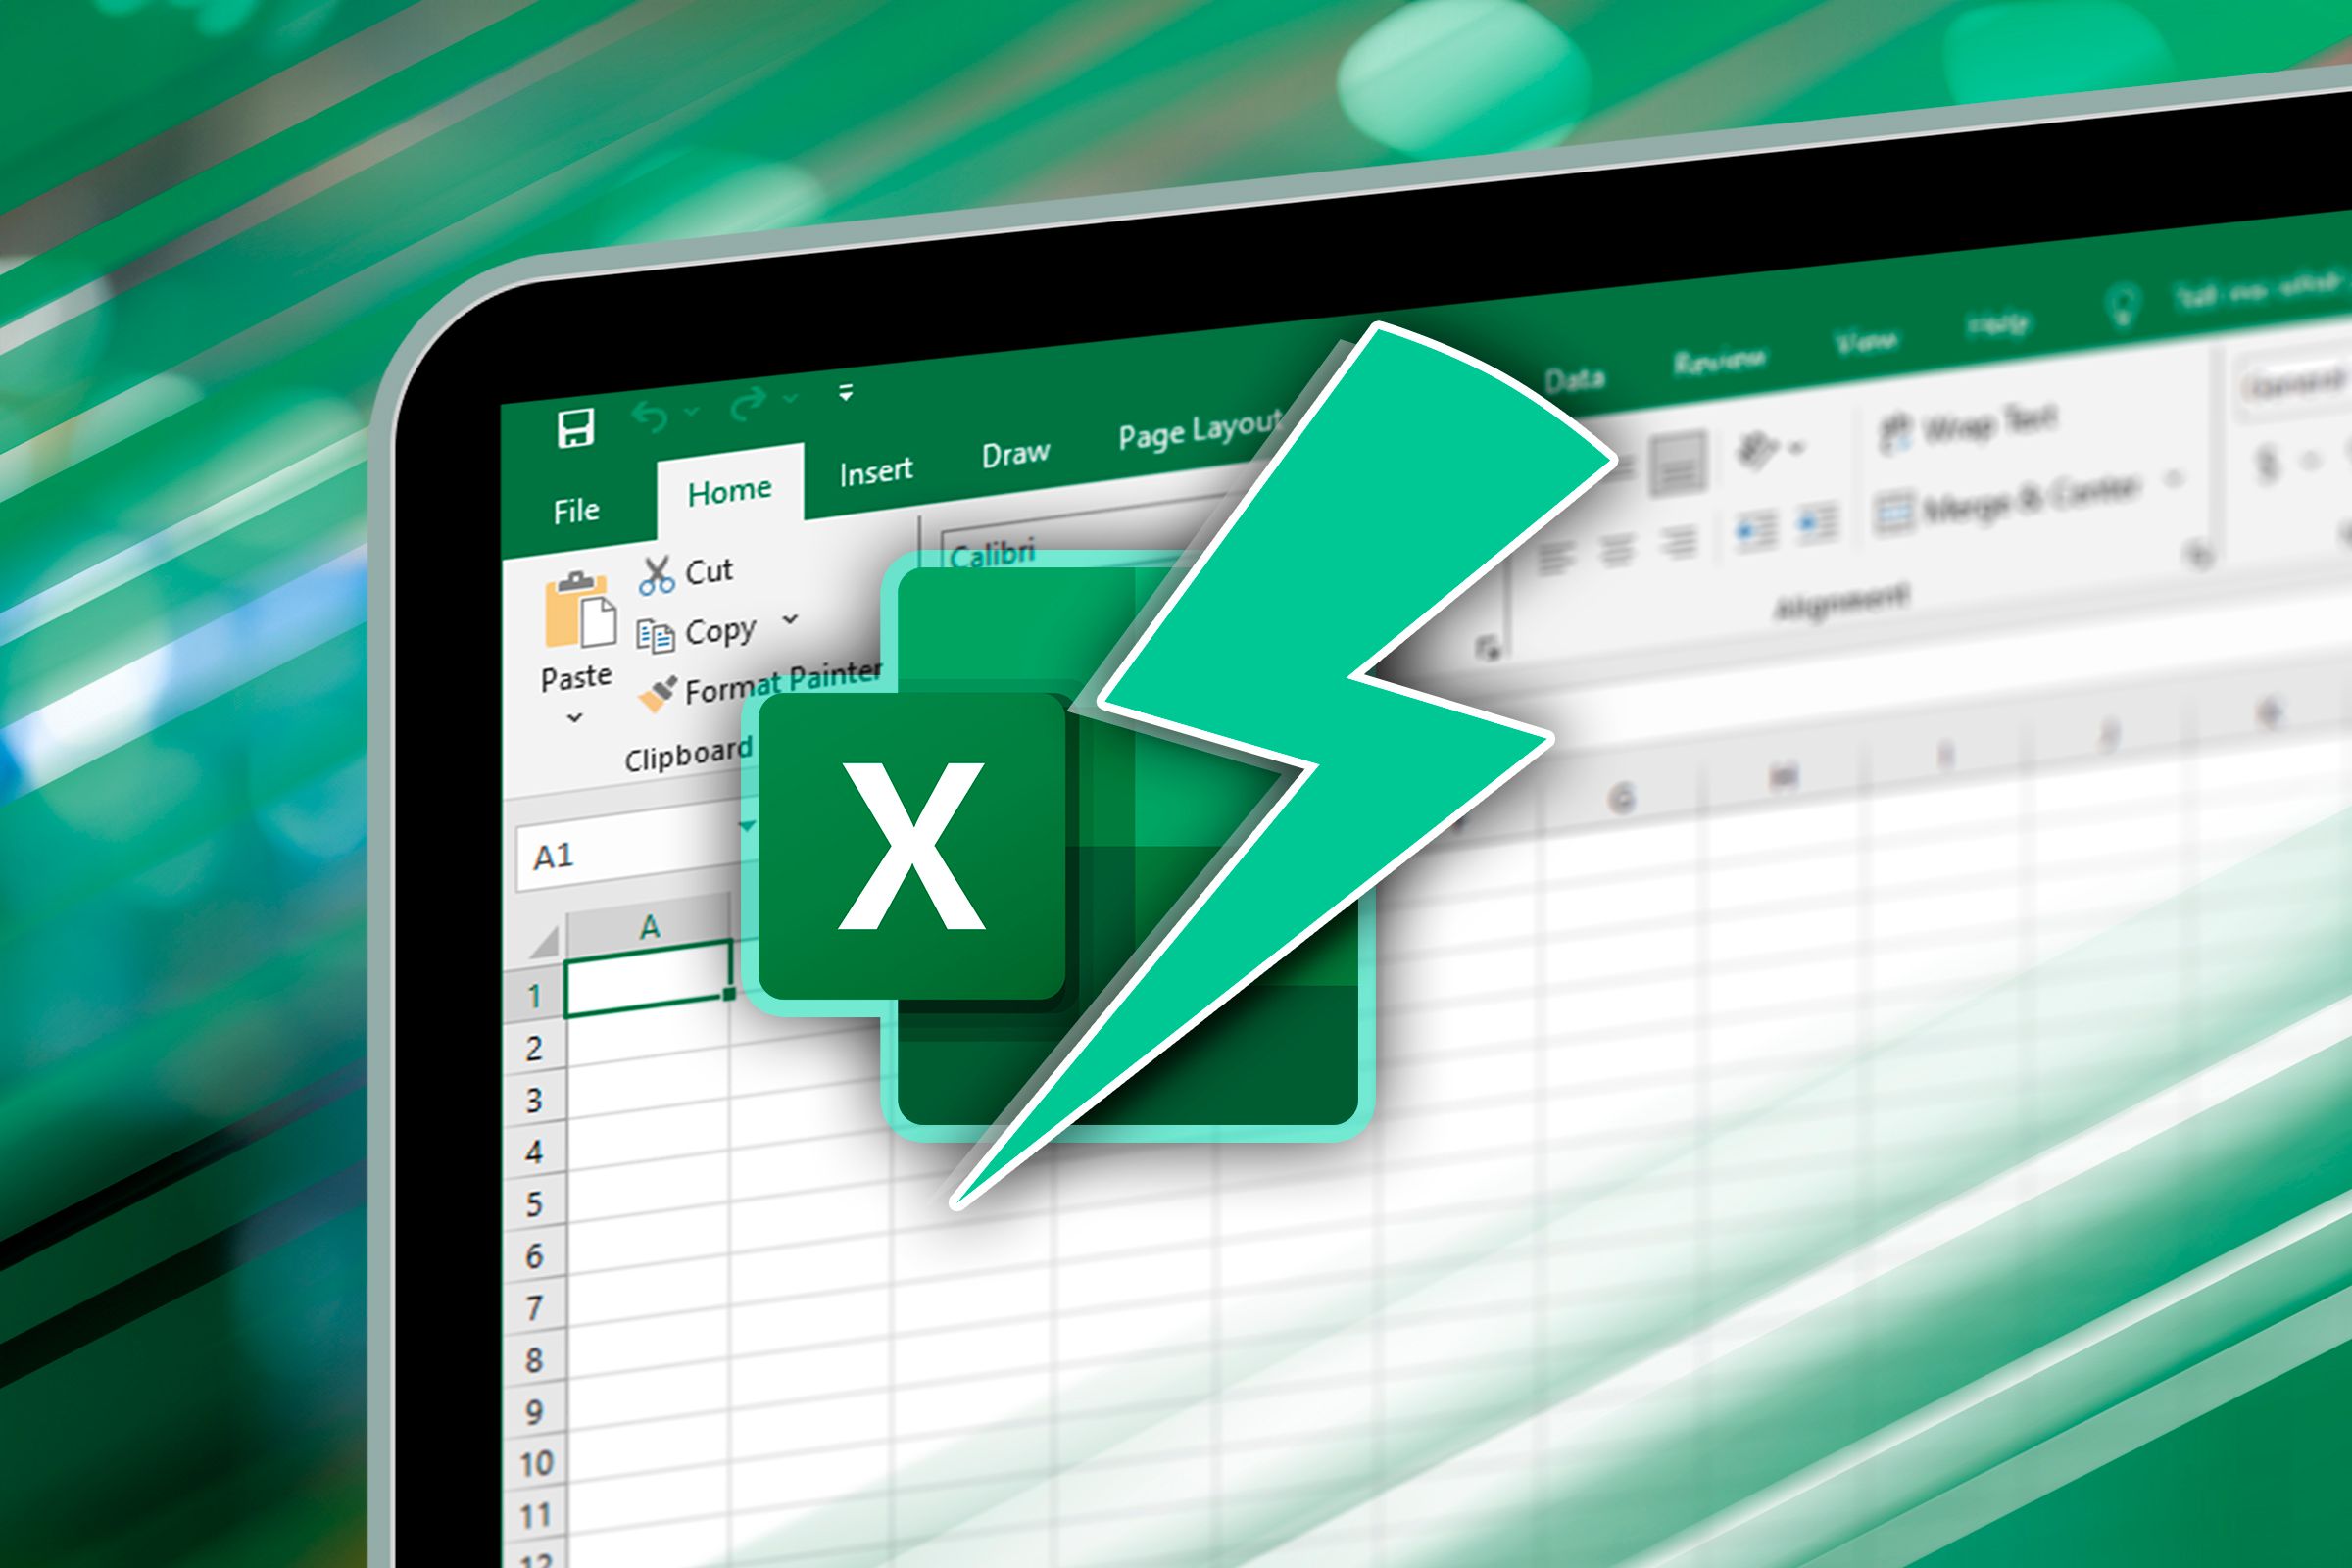 Excel spreadsheet in the background with the Excel icon and a speed symbol in the center.